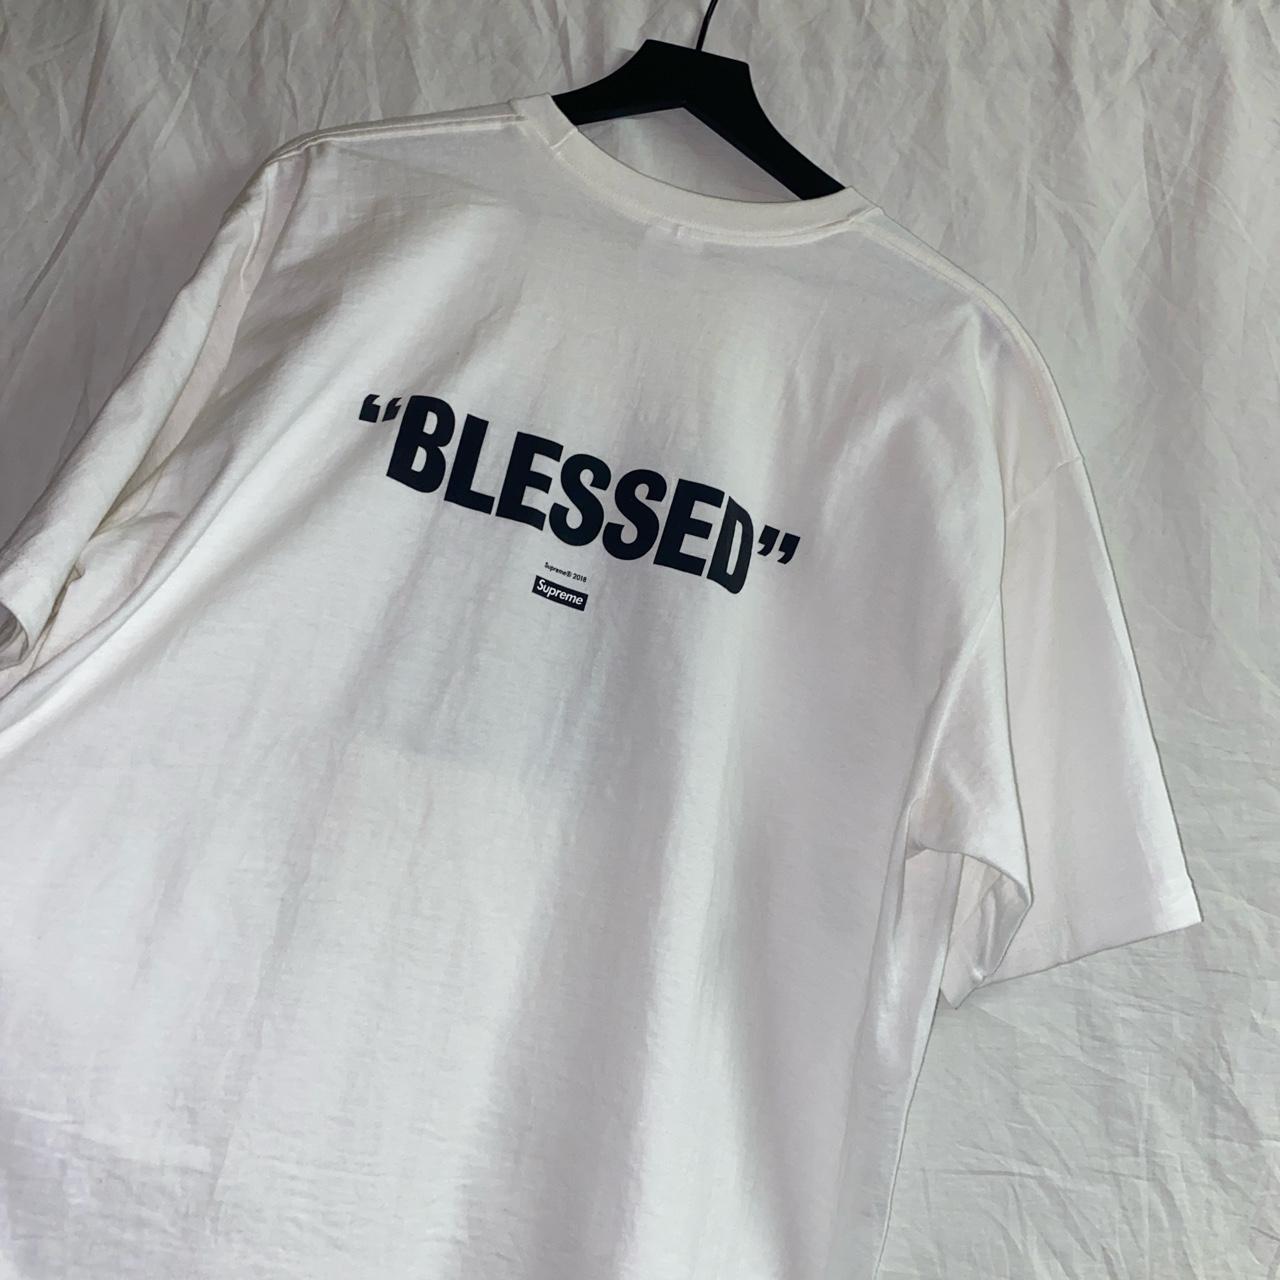 Supreme blessed 2018 t shirt in pretty much new... - Depop